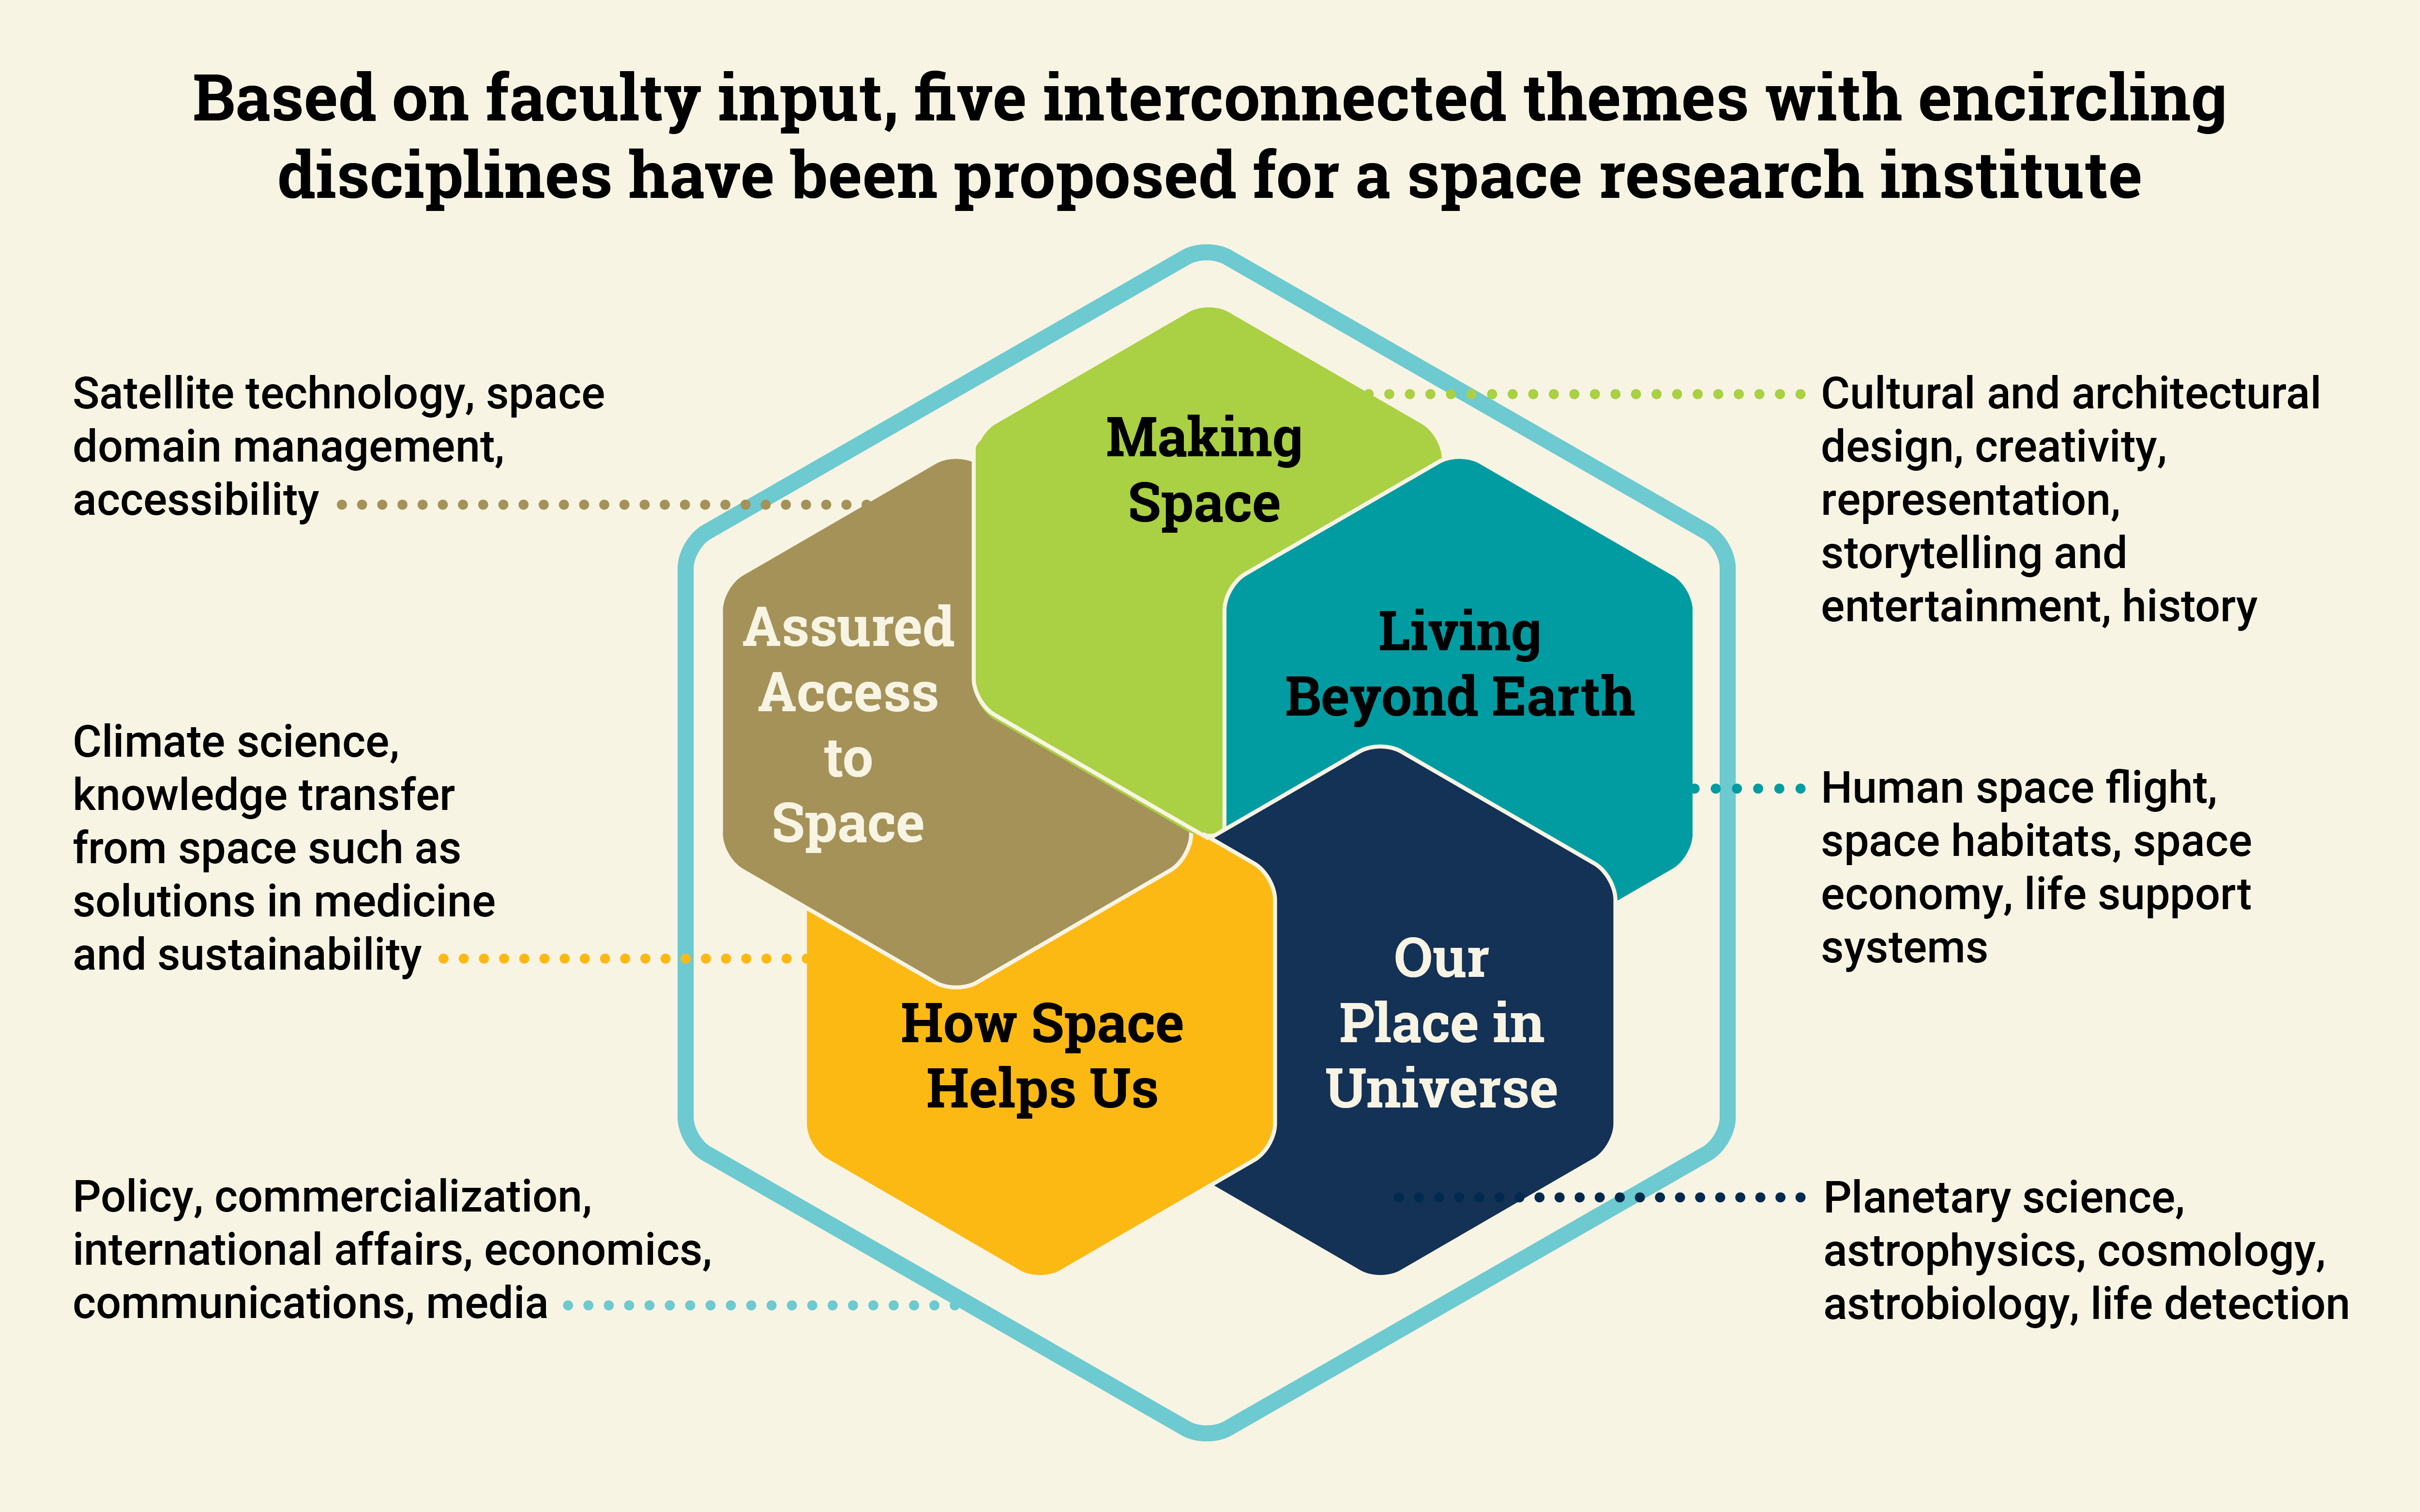 Illustrative graphic showing research areas in space by themes 